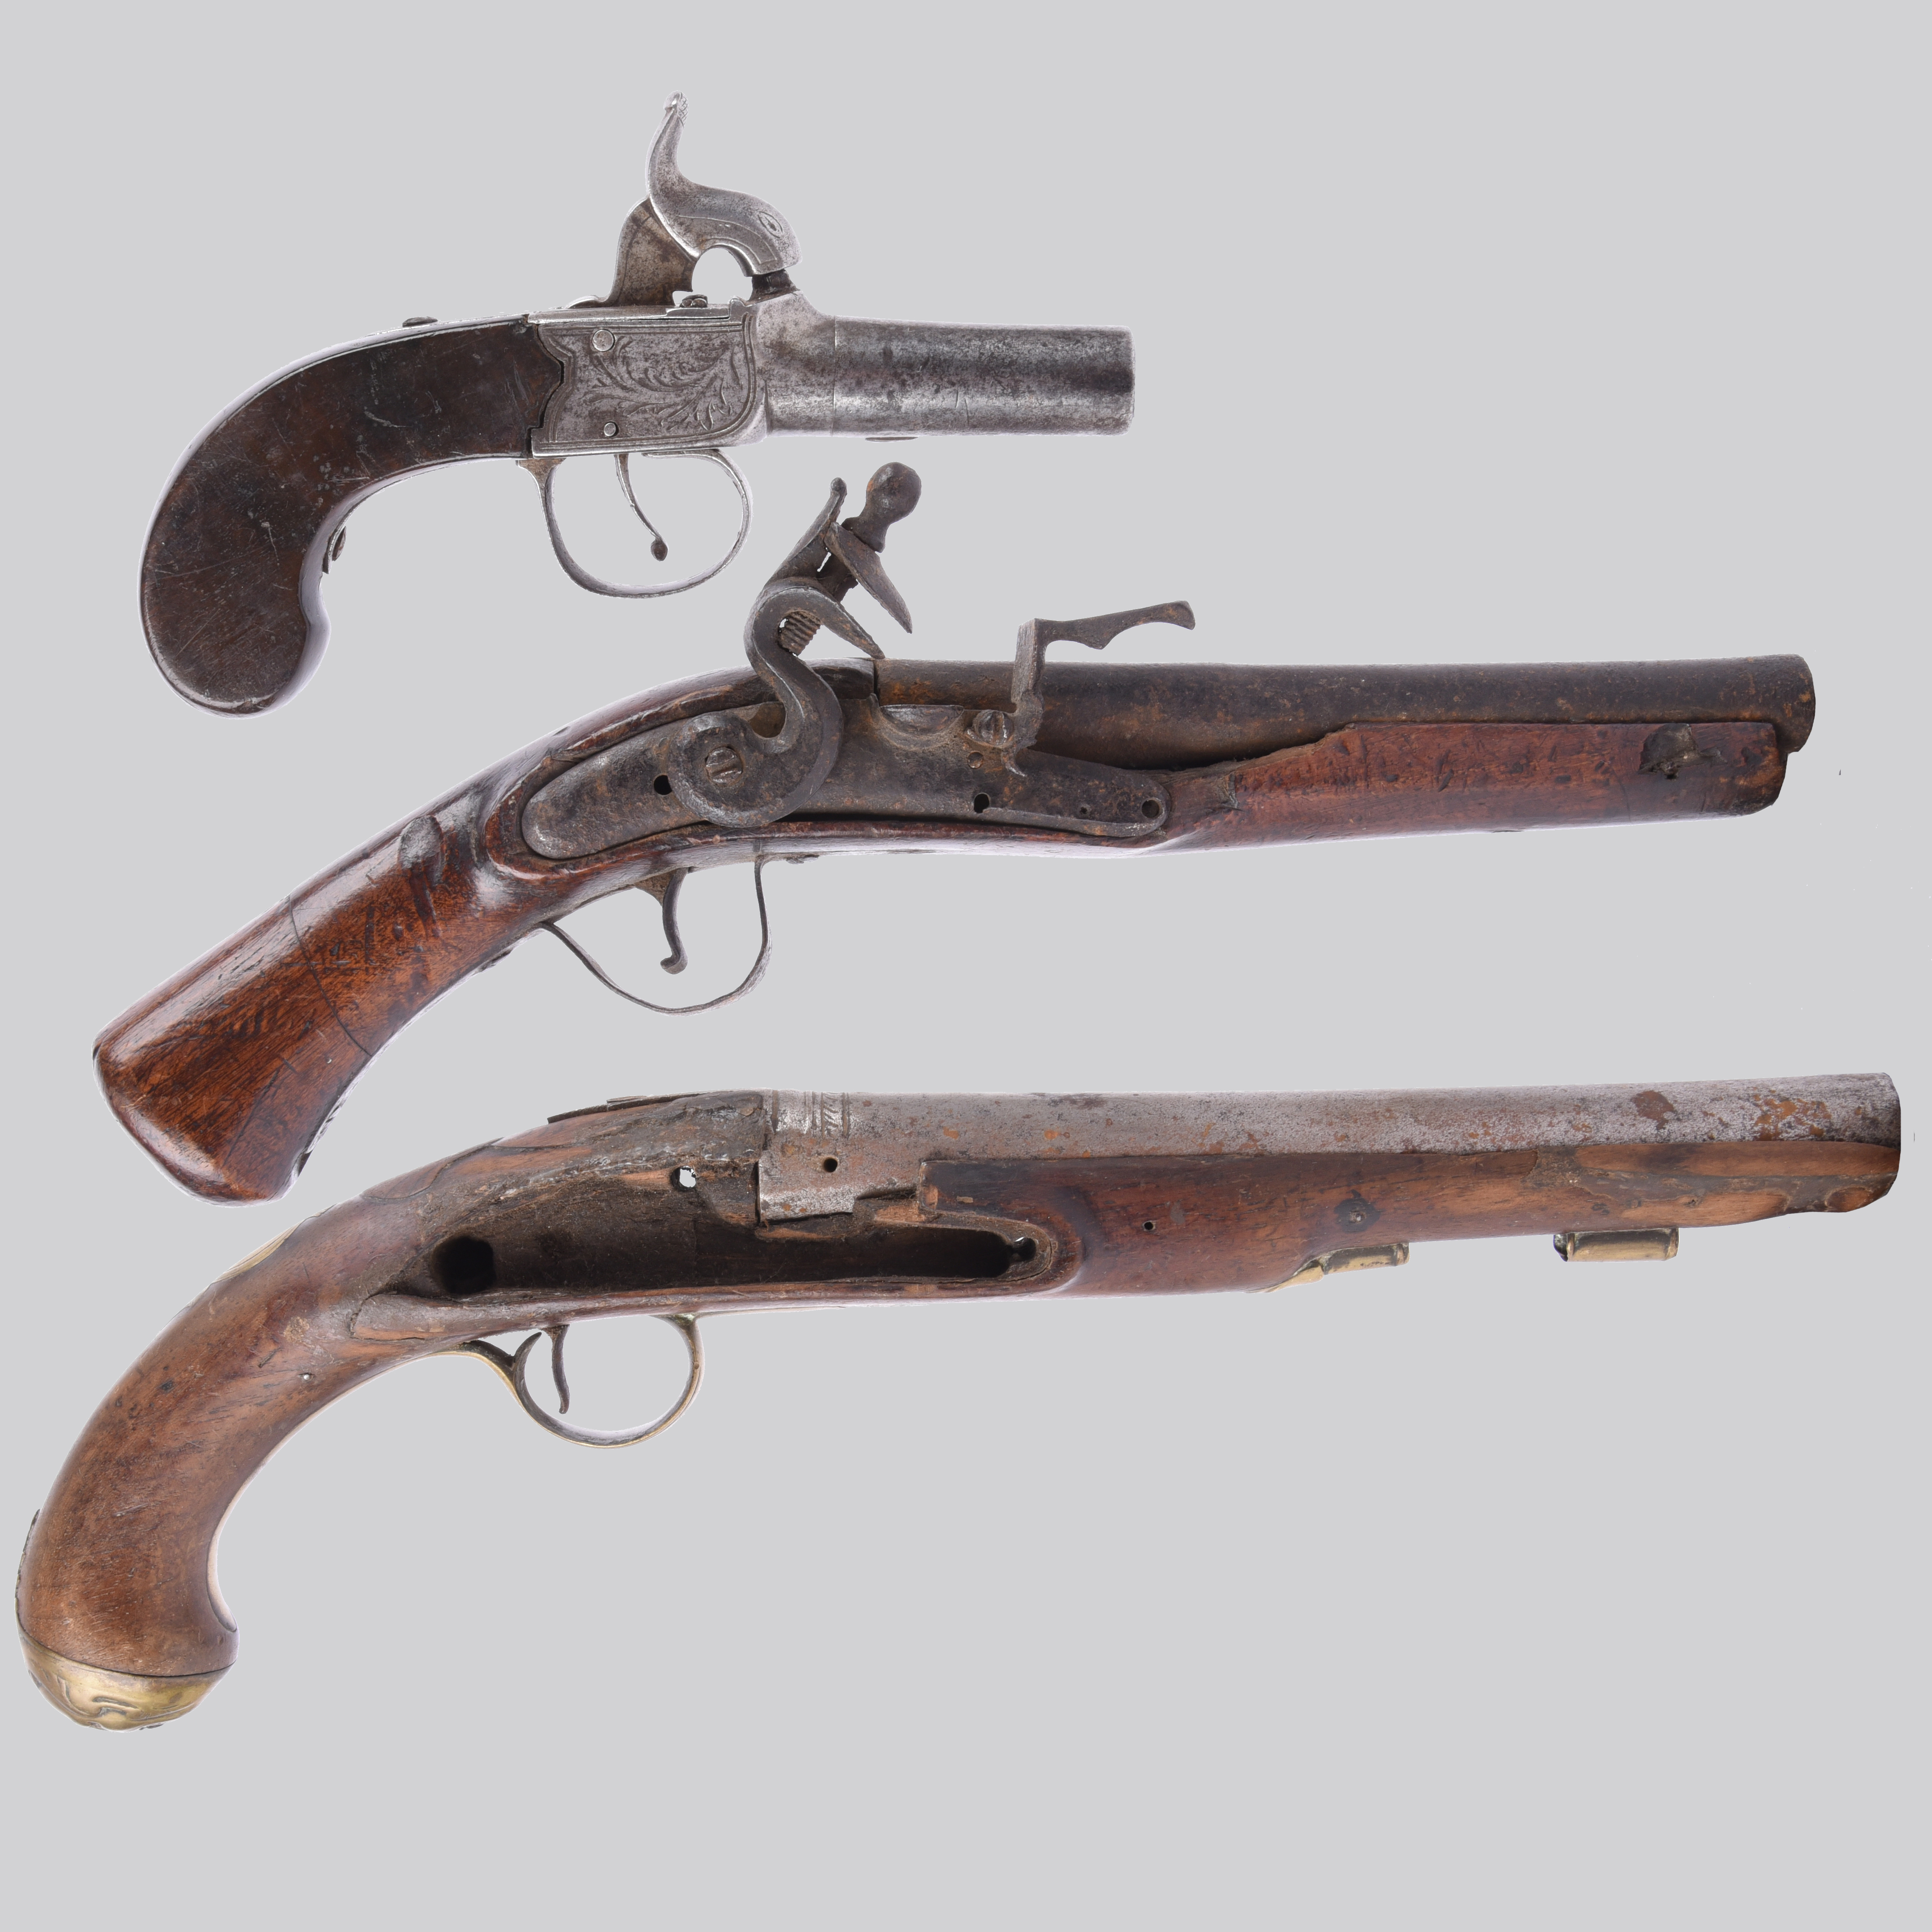 The major parts of three antique pistols: i) the barrel, stock and external lock parts of a